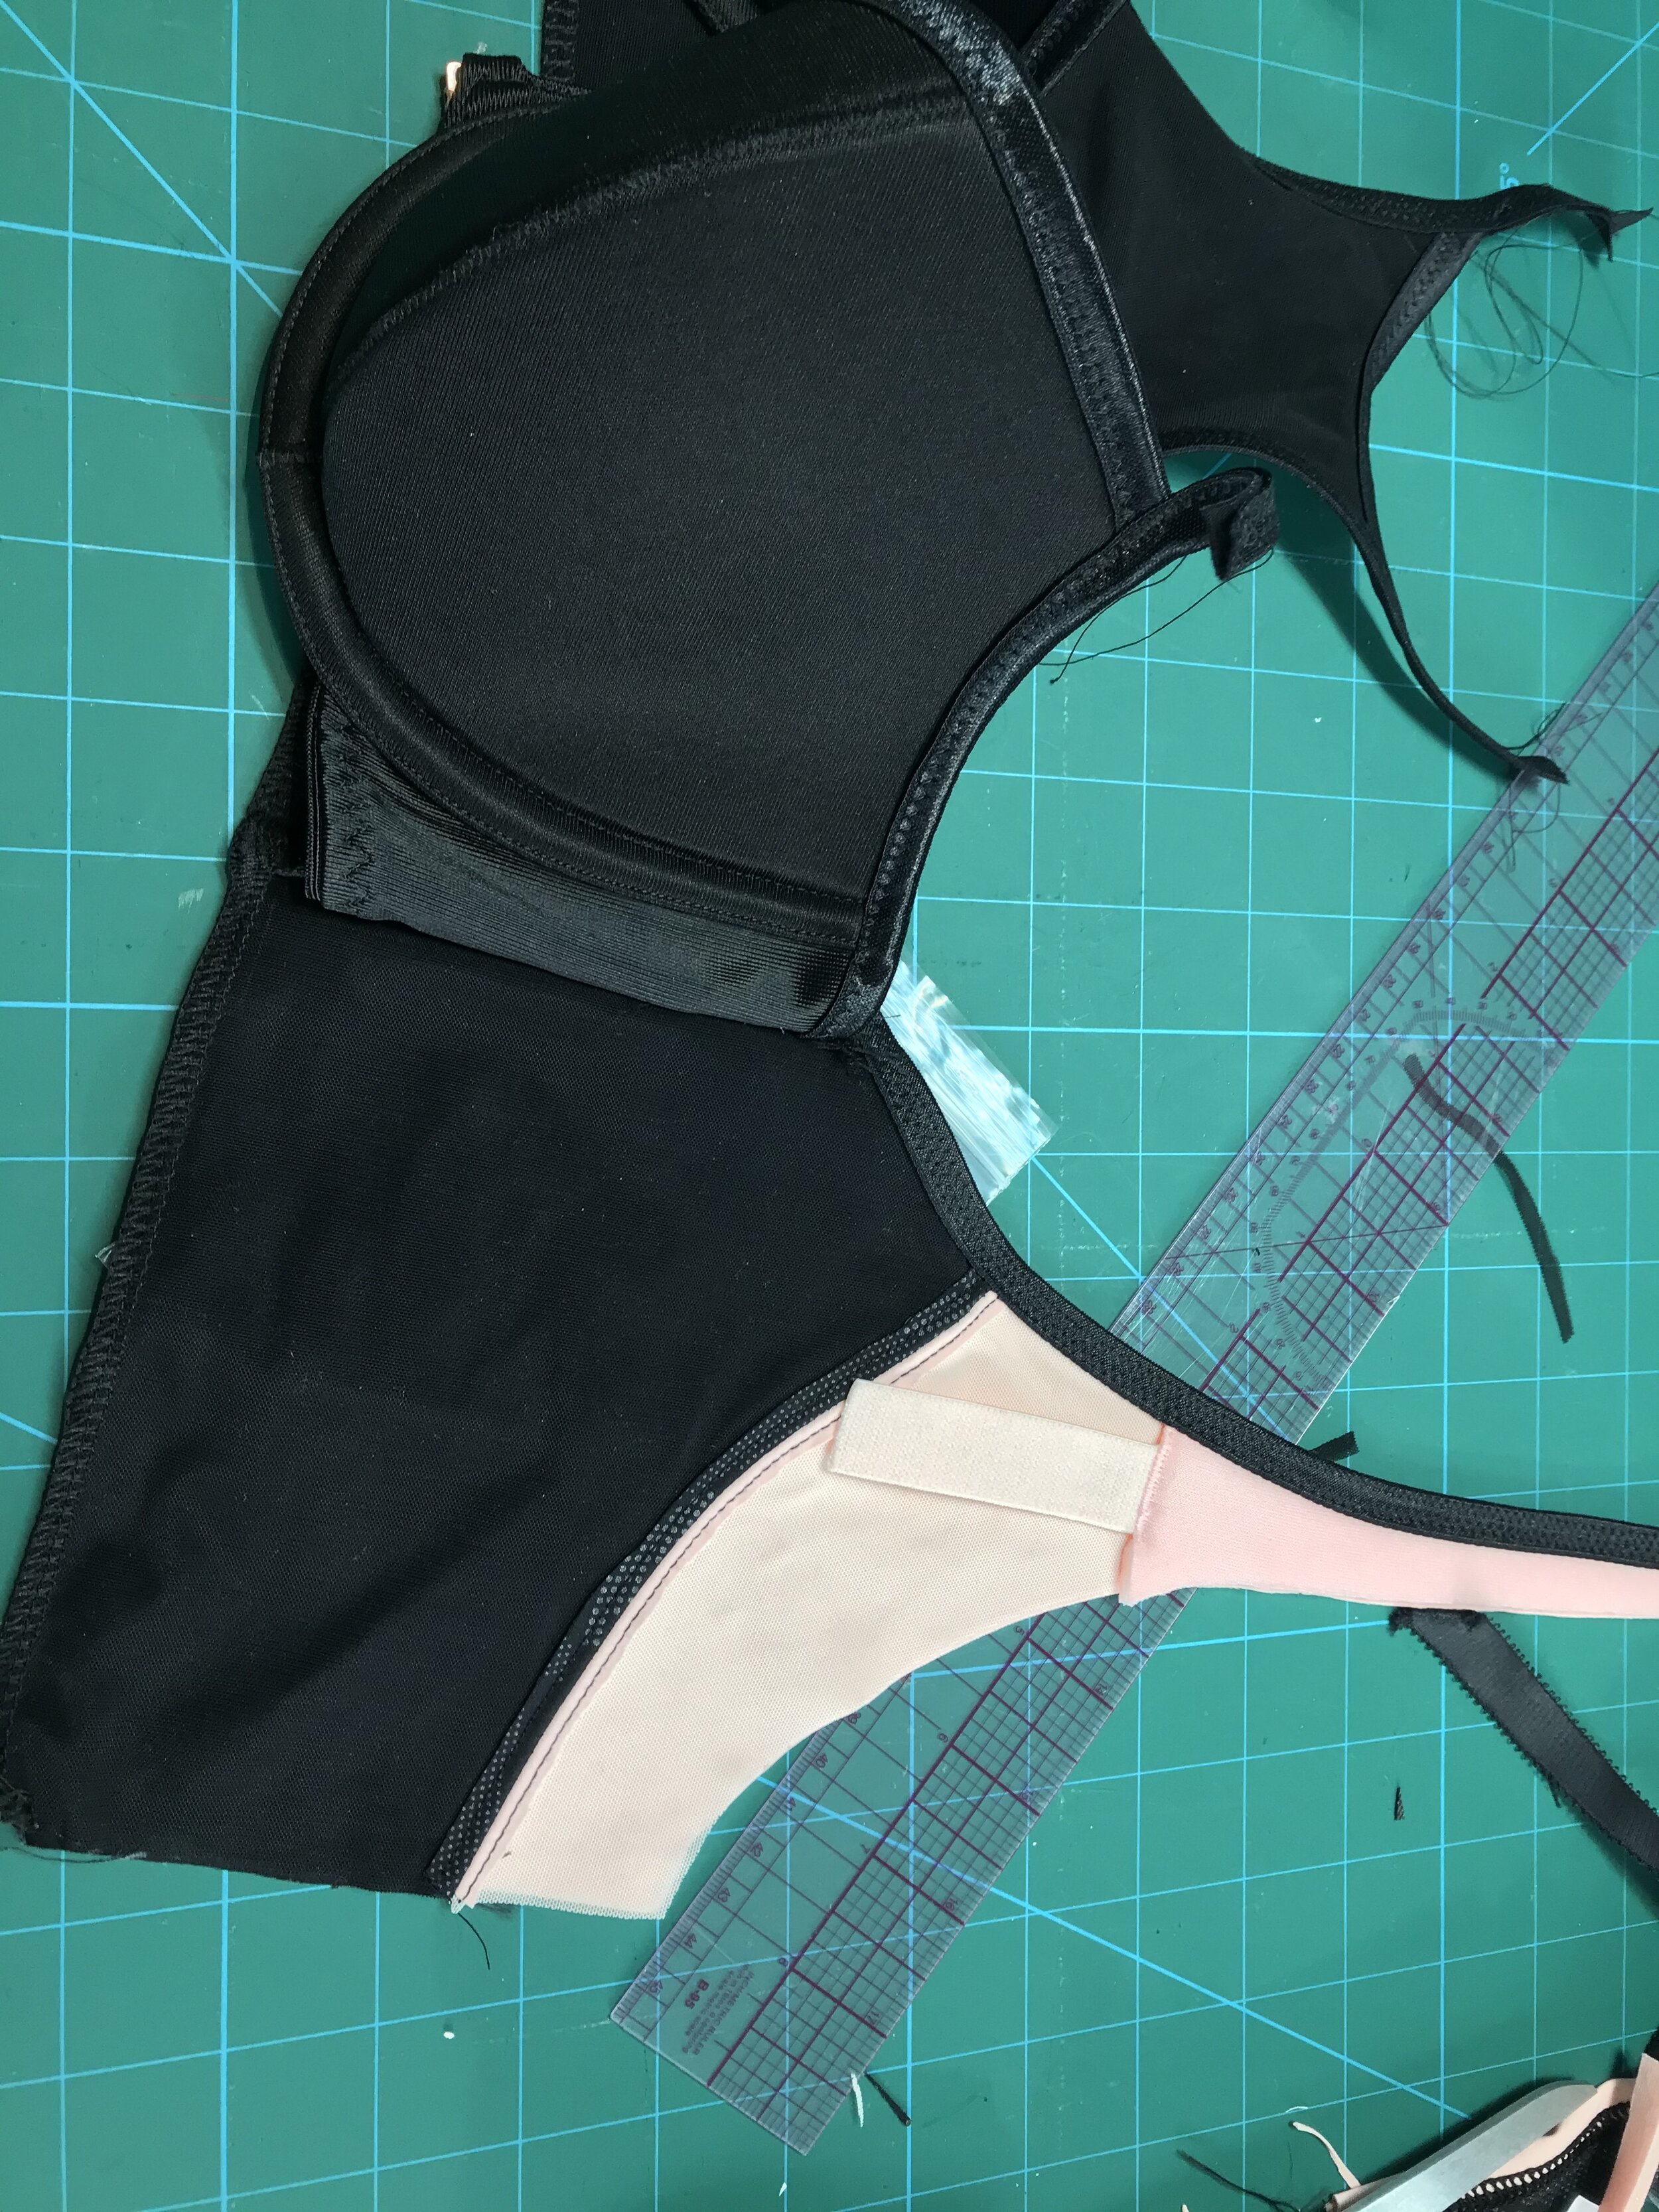 Clothing + Fashion: How to Shorten Bra Straps • Crafting a Green World